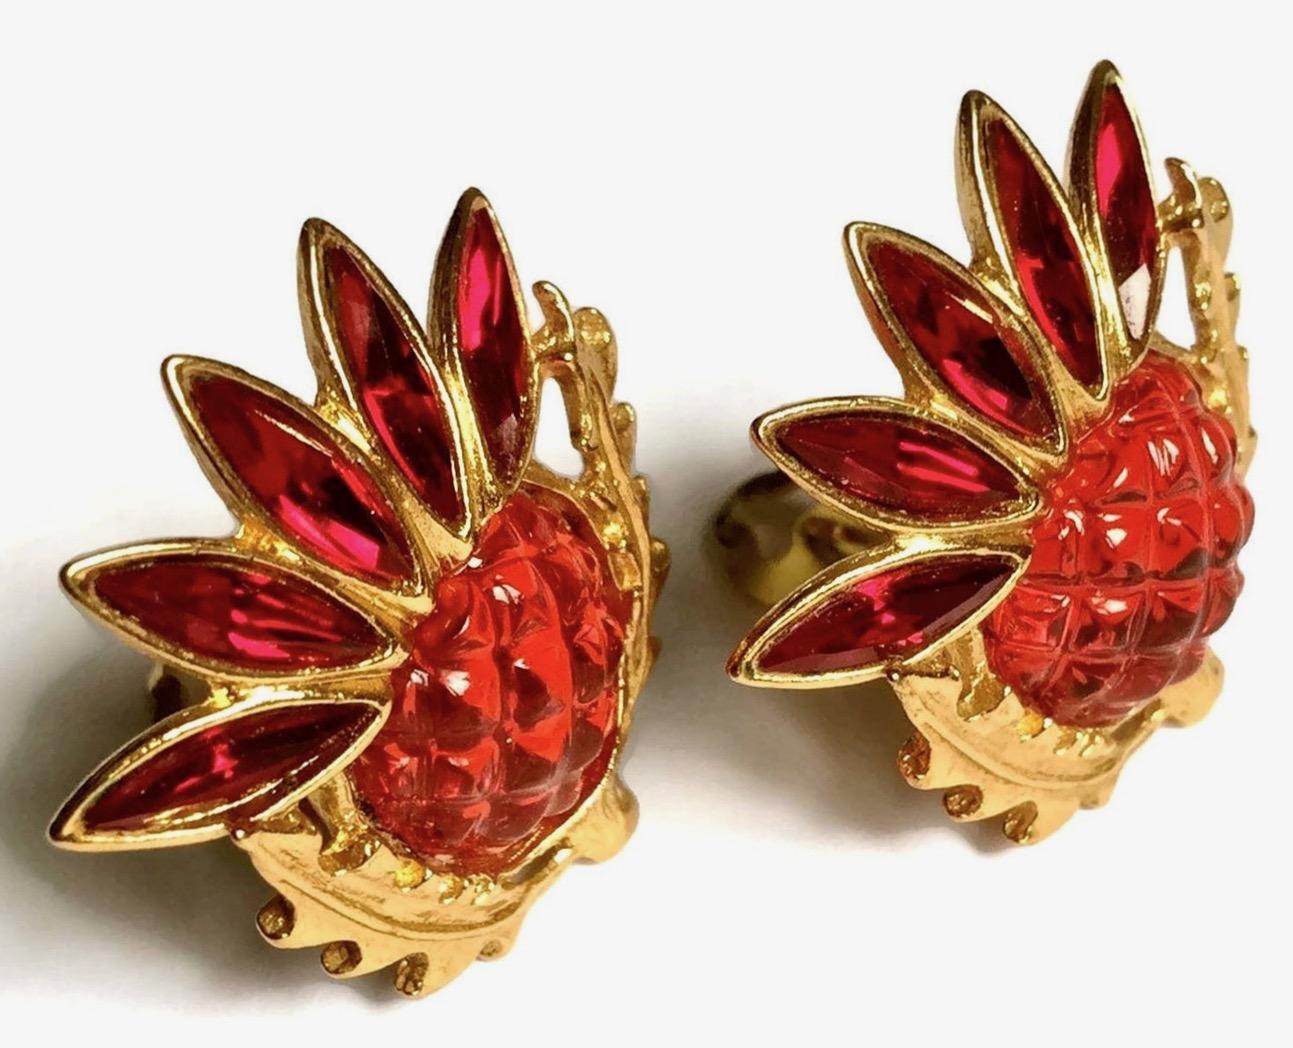 Vintage YSL Yves Saint Laurent Pineapple Lucite Resin Rhinestone Earrings

Measurements:
Large Disc: 1.33 inches (3.4 cm)
Small Disc: 1.18 inches (3 cm)

Features:
- 100% Authentic YVES SAINT LAURENT.
- Textured red lucite resin pineapple with